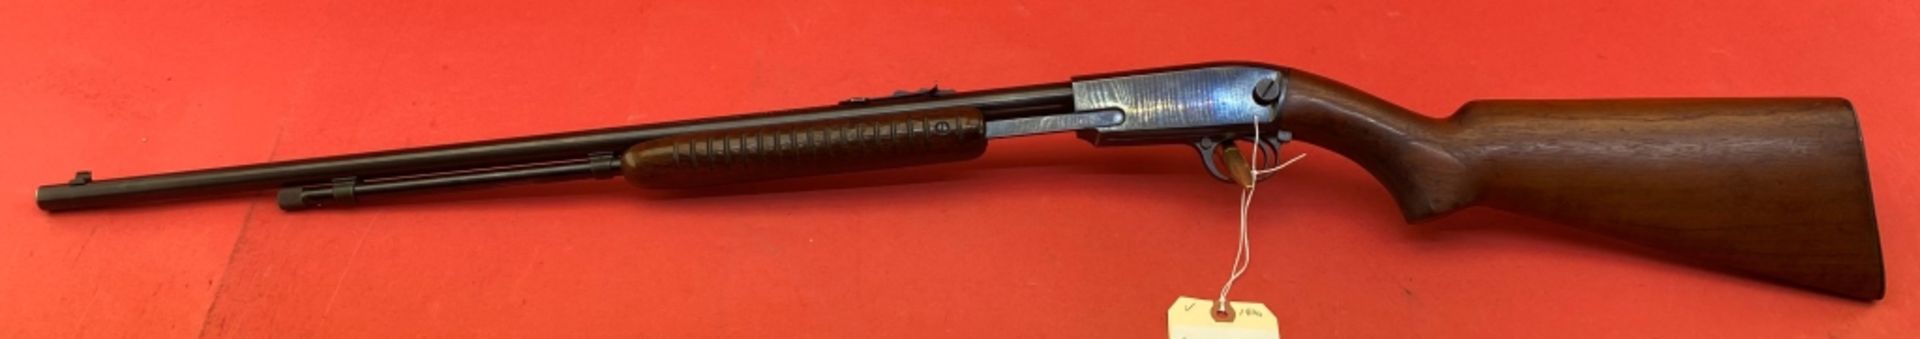 Winchester 61 .22SLLR Rifle - Image 11 of 11